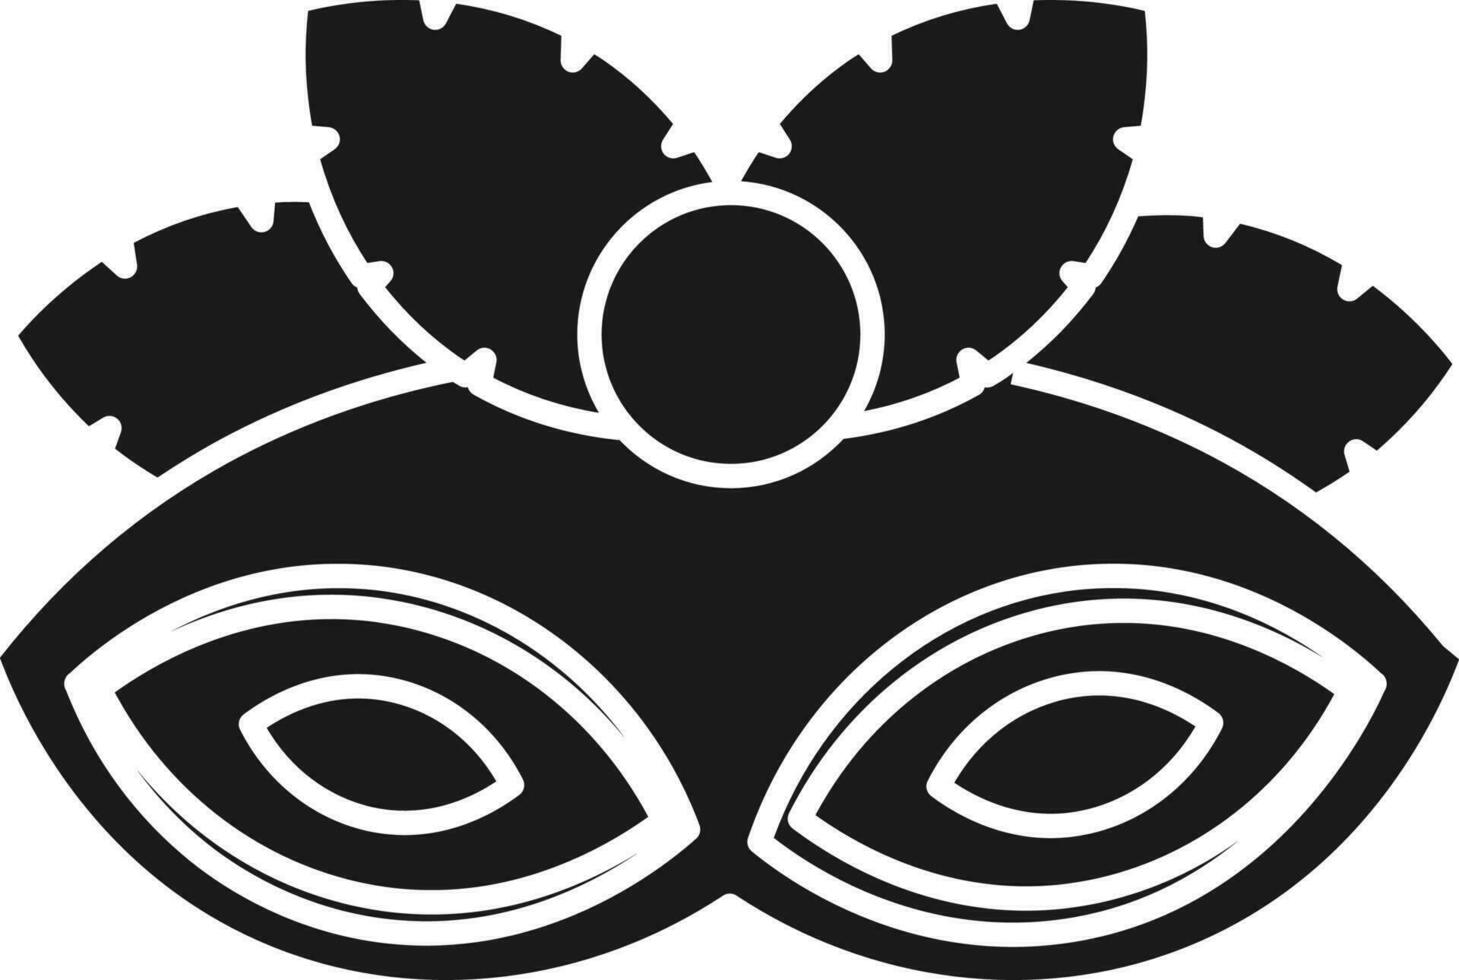 Carnival Mask Icon In Black and White Color. vector